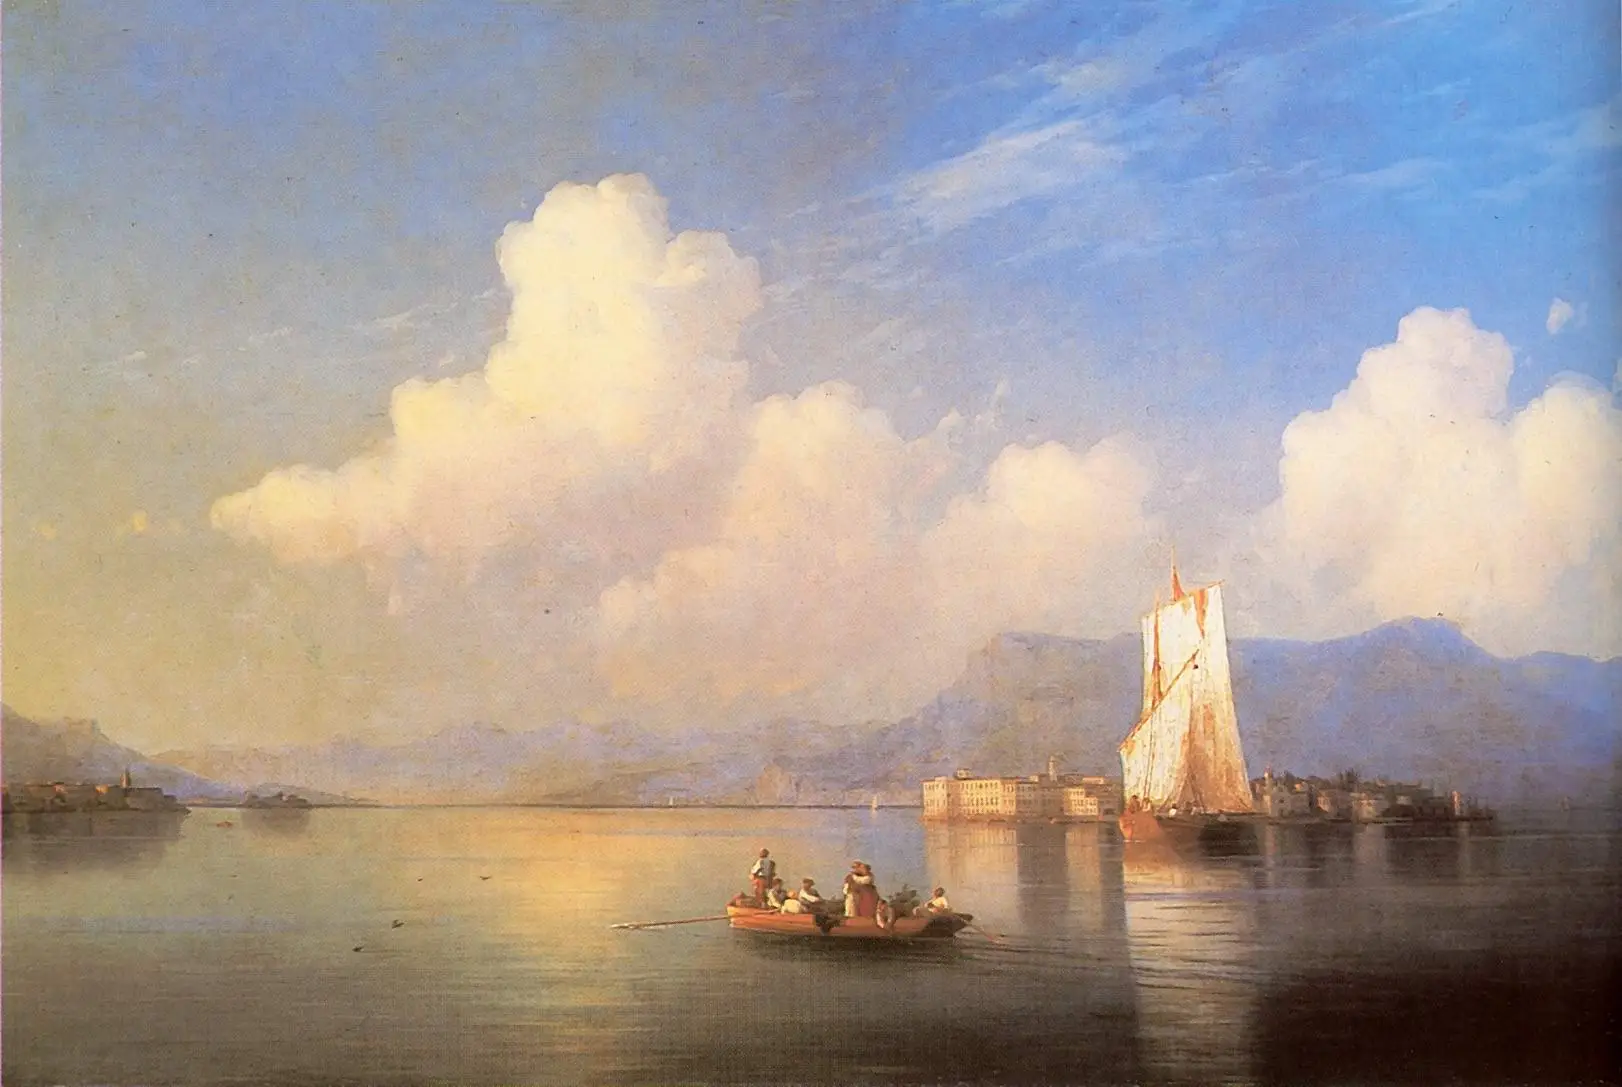 "The Italian landscape. The Evening", Aivazovsky - Description of the Painting